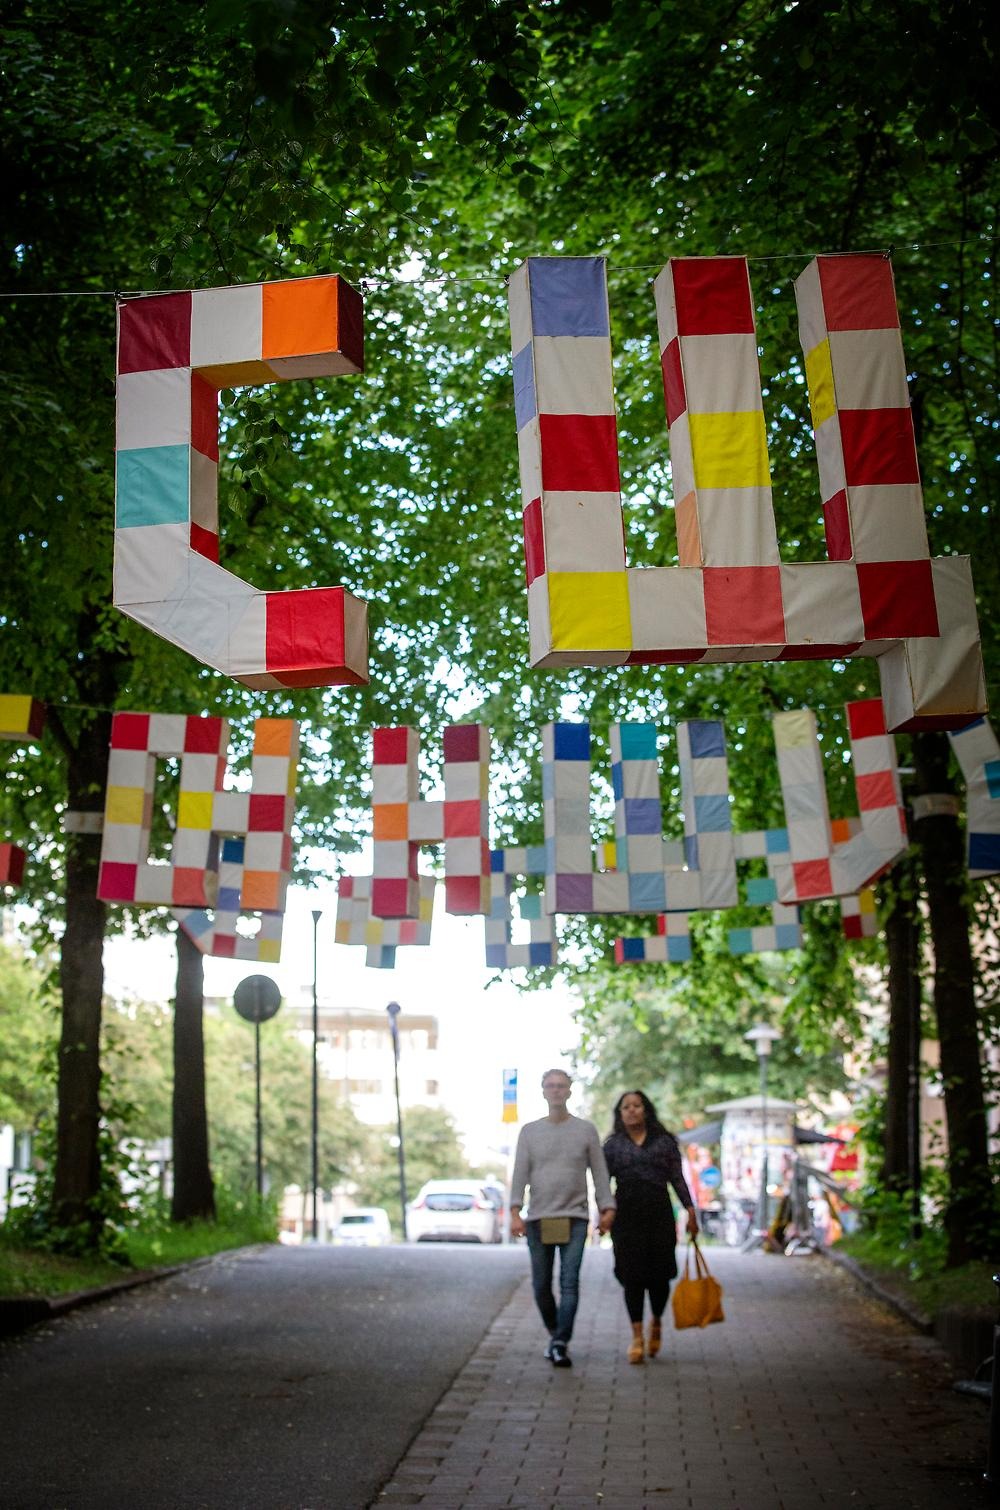 Above a bicycle lane in the trees hang large letters from the Latin, Hebrew and Cyrillic alphabets. The letters are three-dimensional, white and with sewn-on rectangular textile pieces in blue, red and orange tones. Underneath the letters two people can be seen walking and holding hands.